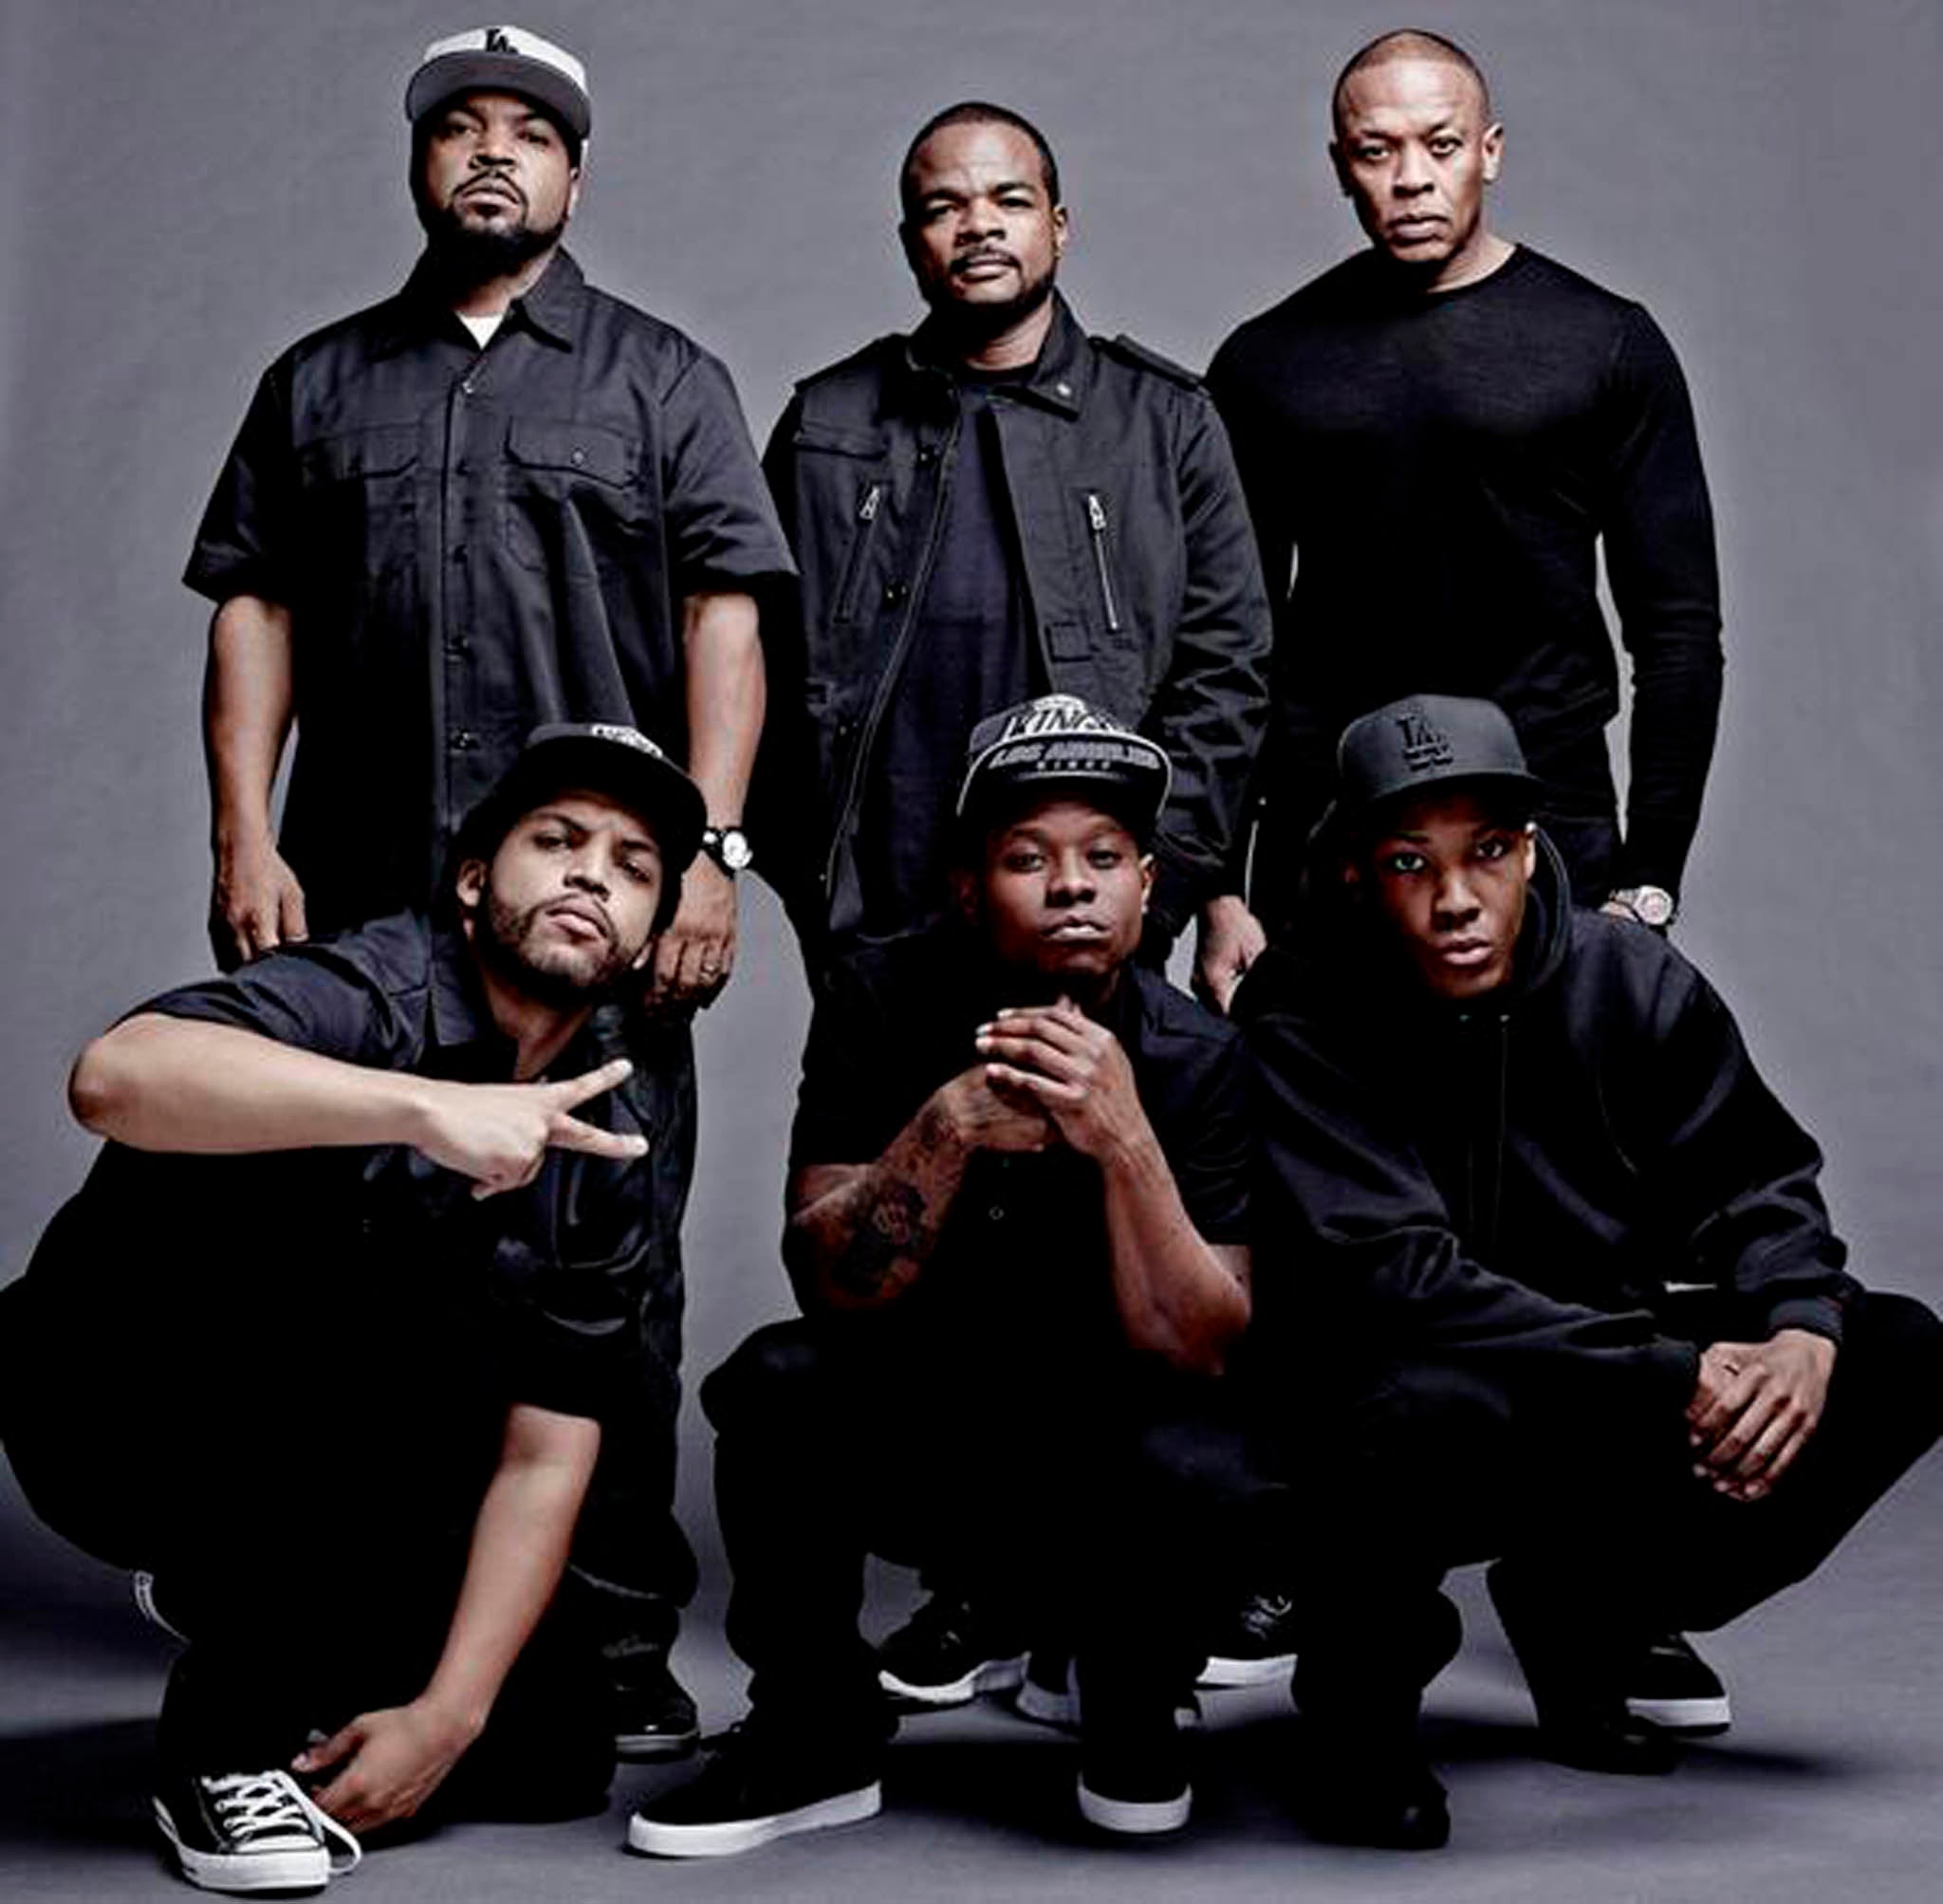 The cast and filmmakers of Straight Outta Compton (clockwise, from top left): Producer Ice Cube, director F. Gary Gray, producer Dr. Dre, actor Corey Hawkins (as Dr. Dre), Jason Mitchell (as Eazy-E) and O’Shea Jackson Jr. (as Ice Cube)